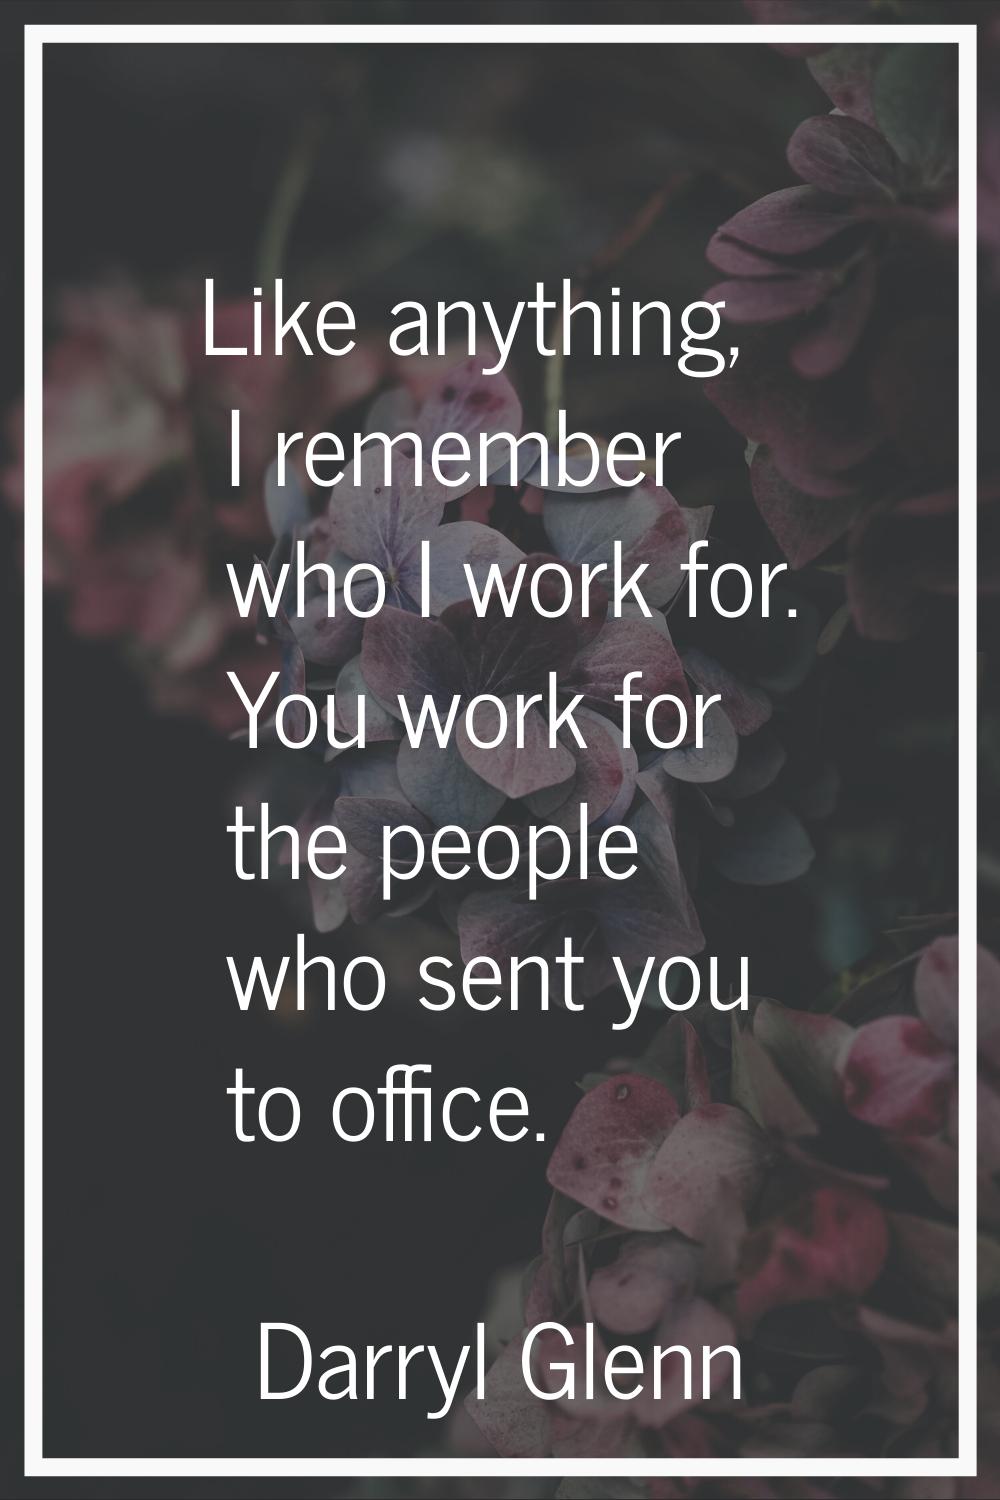 Like anything, I remember who I work for. You work for the people who sent you to office.